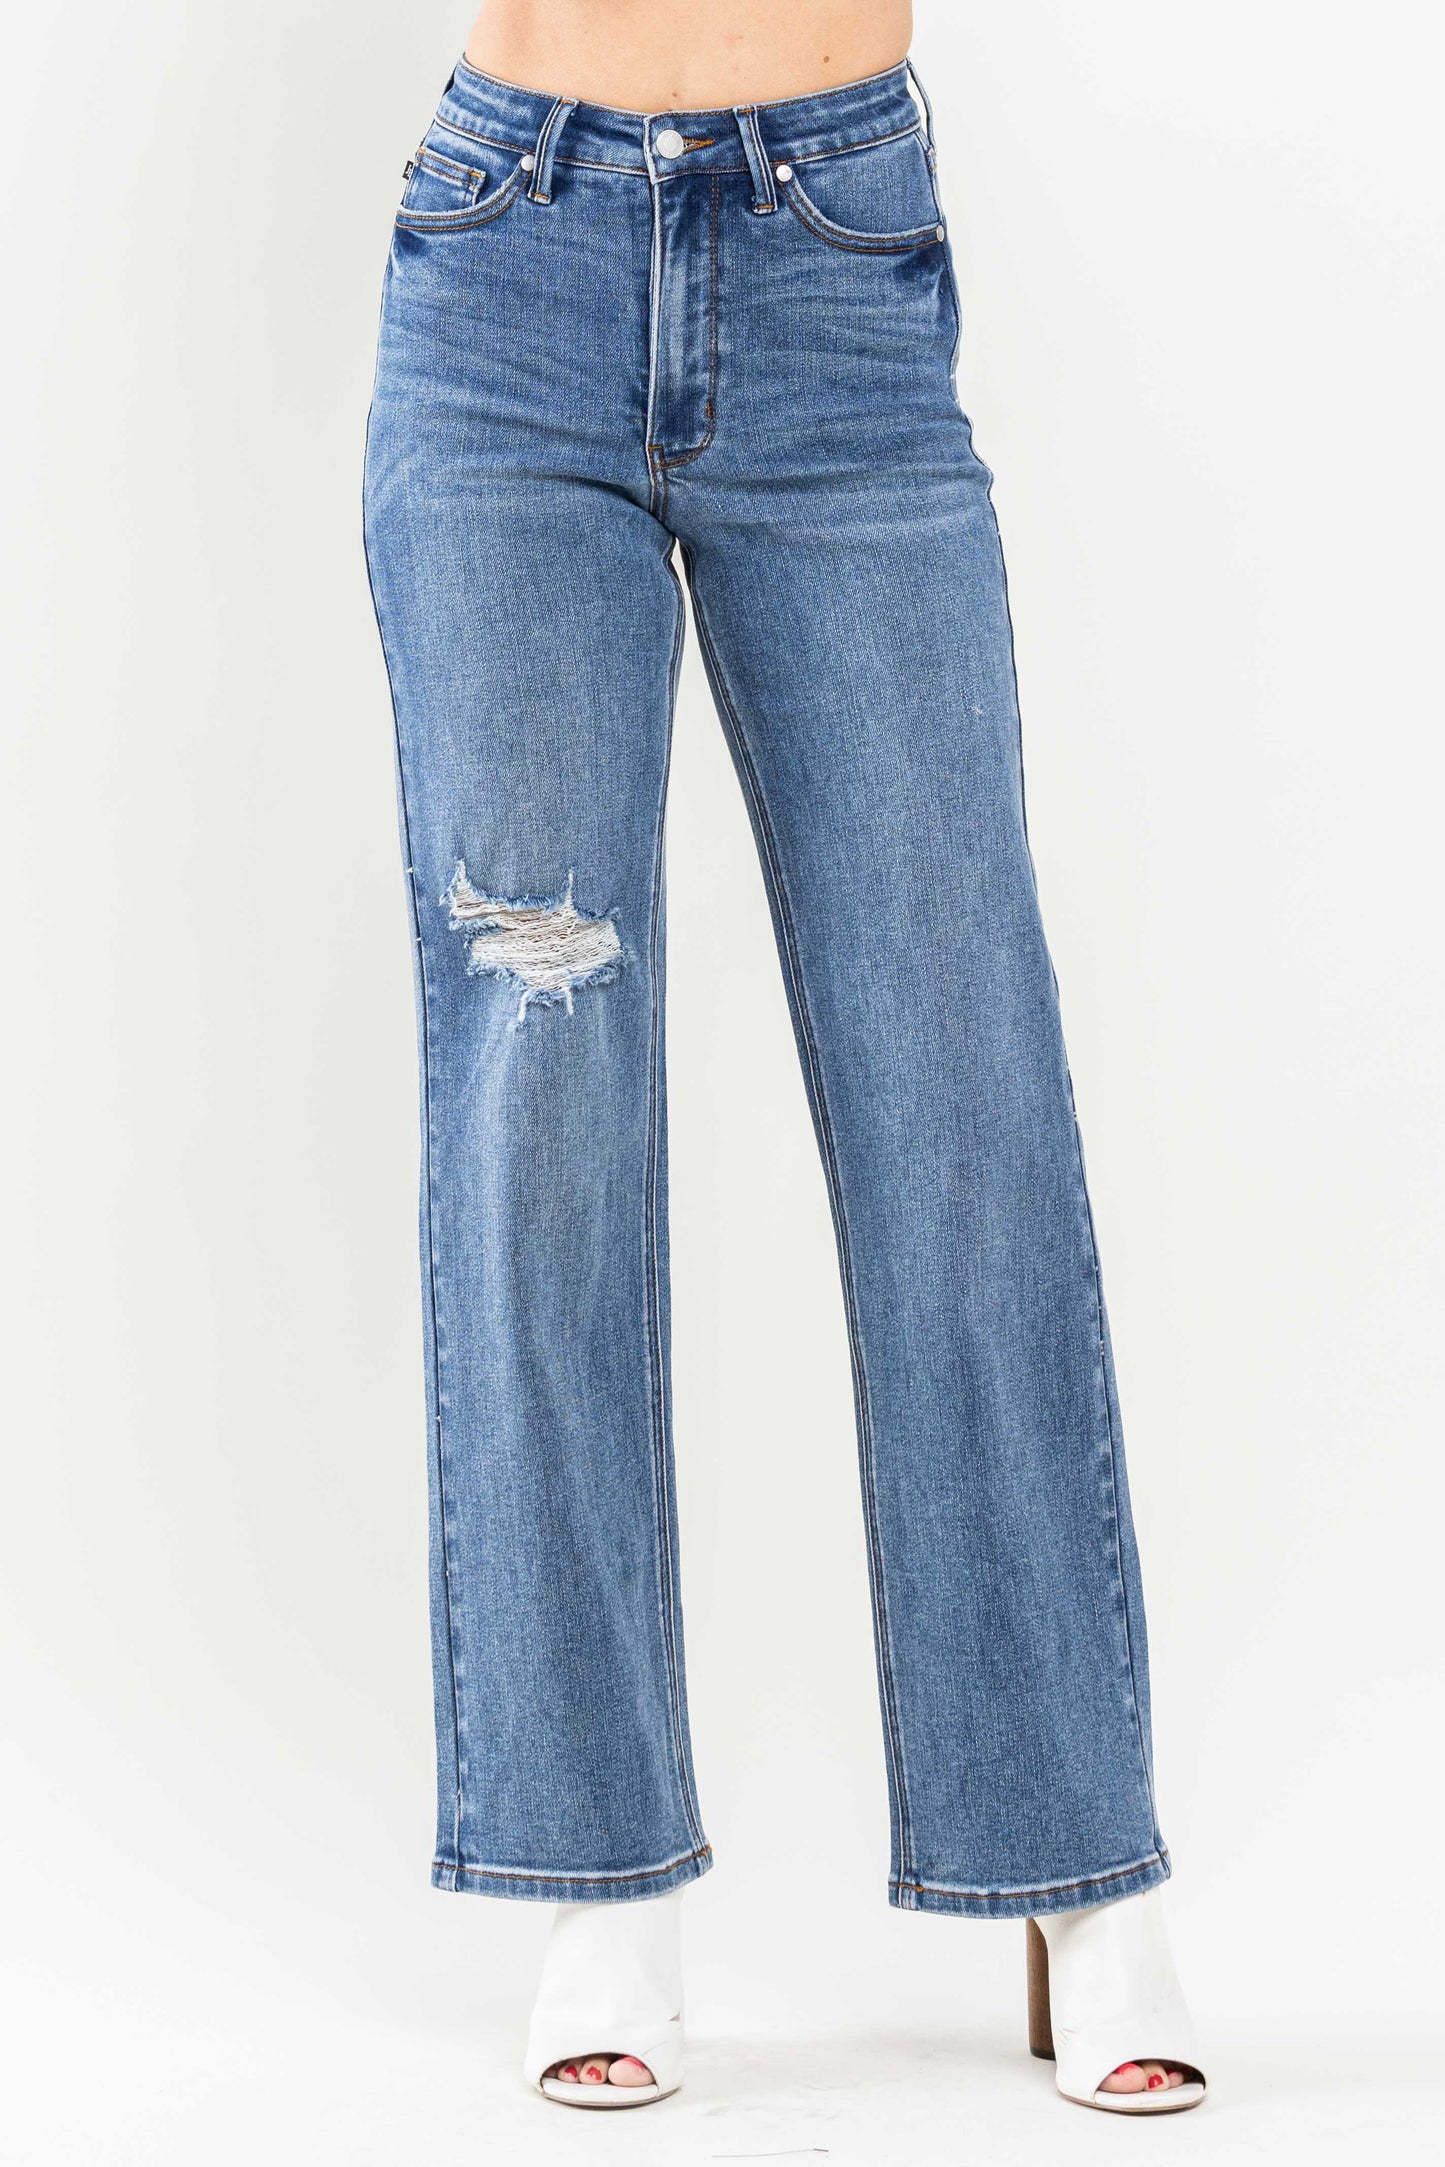 "Reliving The 90's" High Waist Tummy Control Jeans